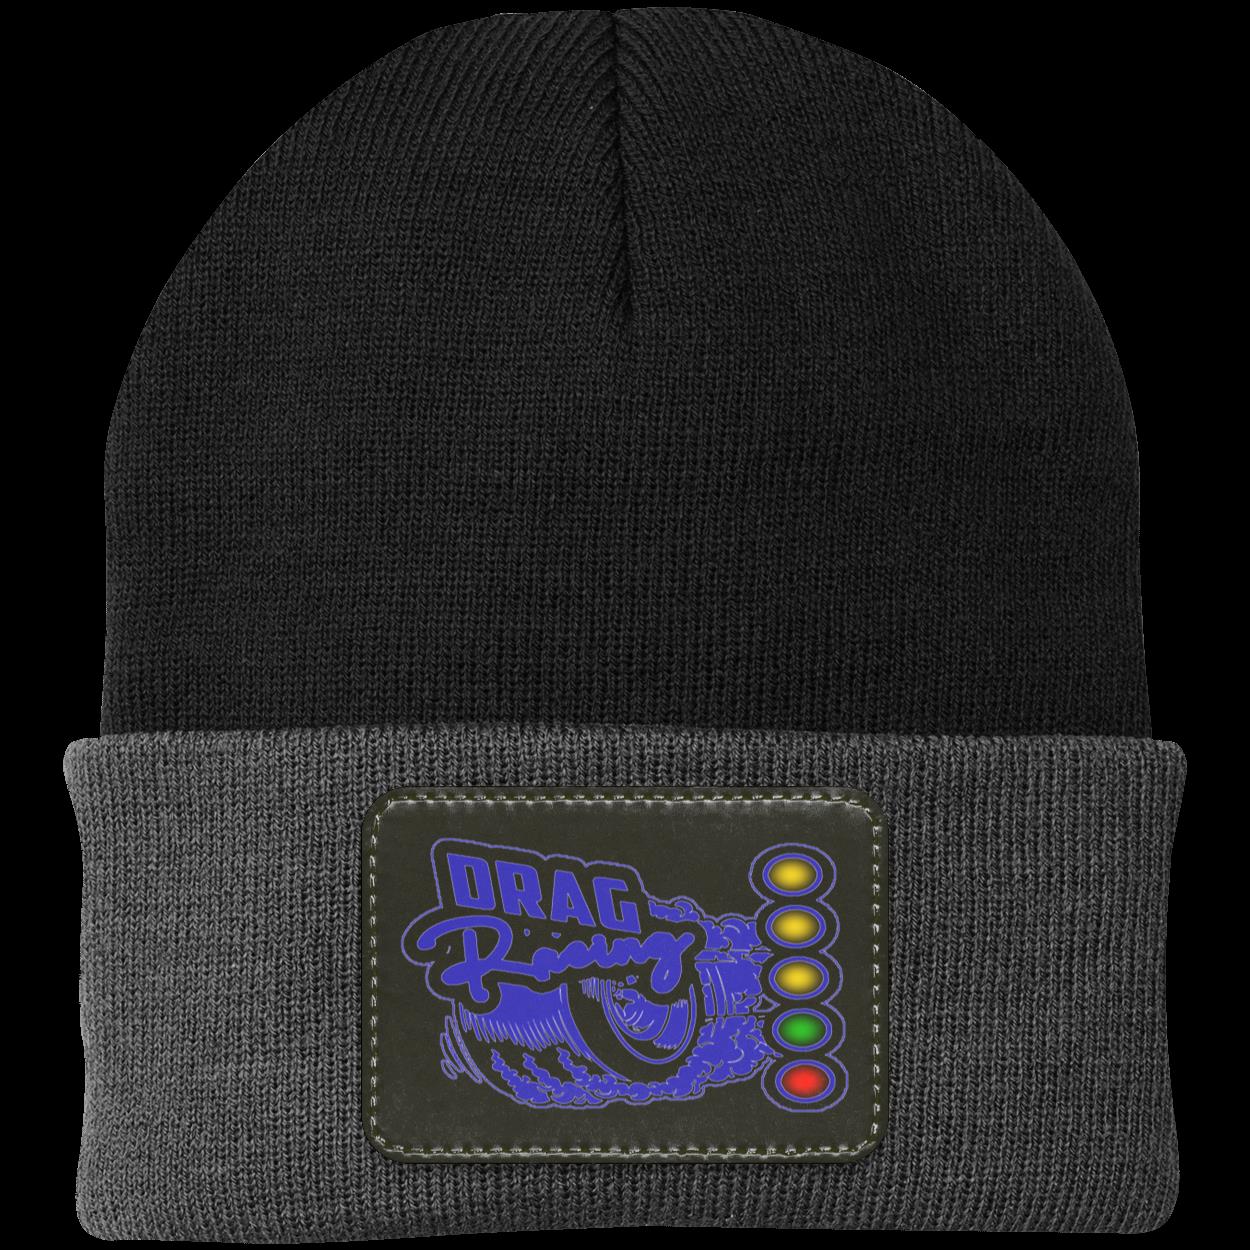 Drag Racing Patched Knit Cap V7